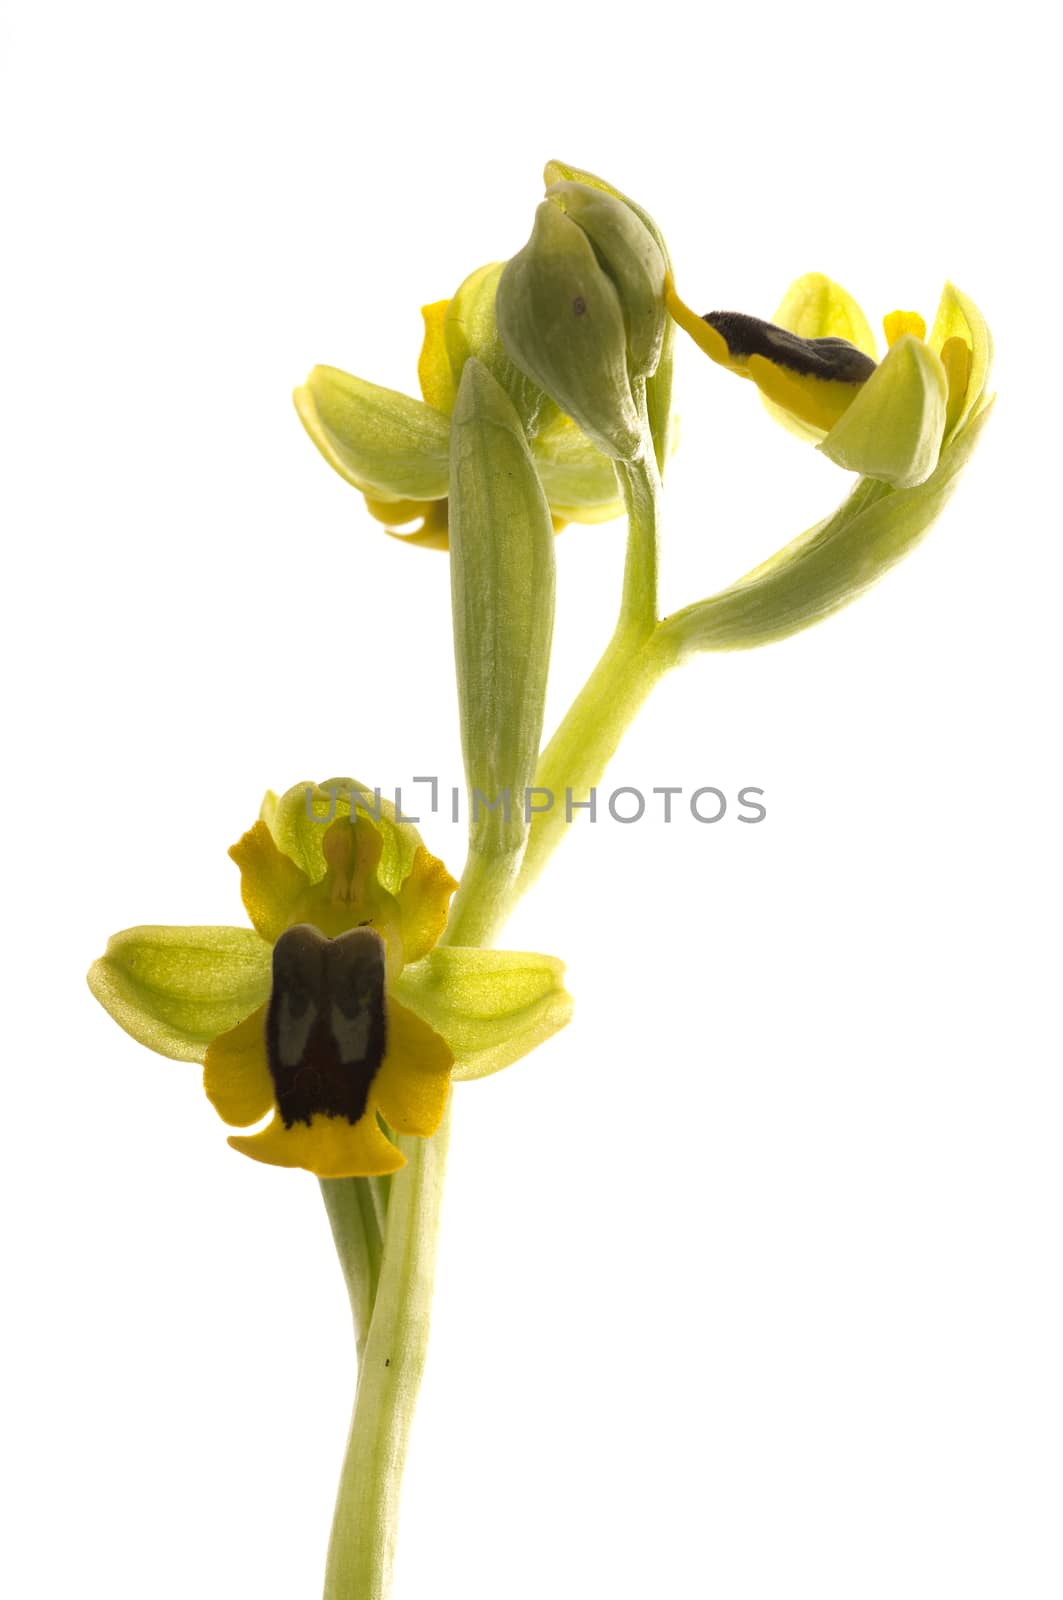 Wild orchid called Yellow Ophrys (Ophrys lutea), white backgroun by jalonsohu@gmail.com